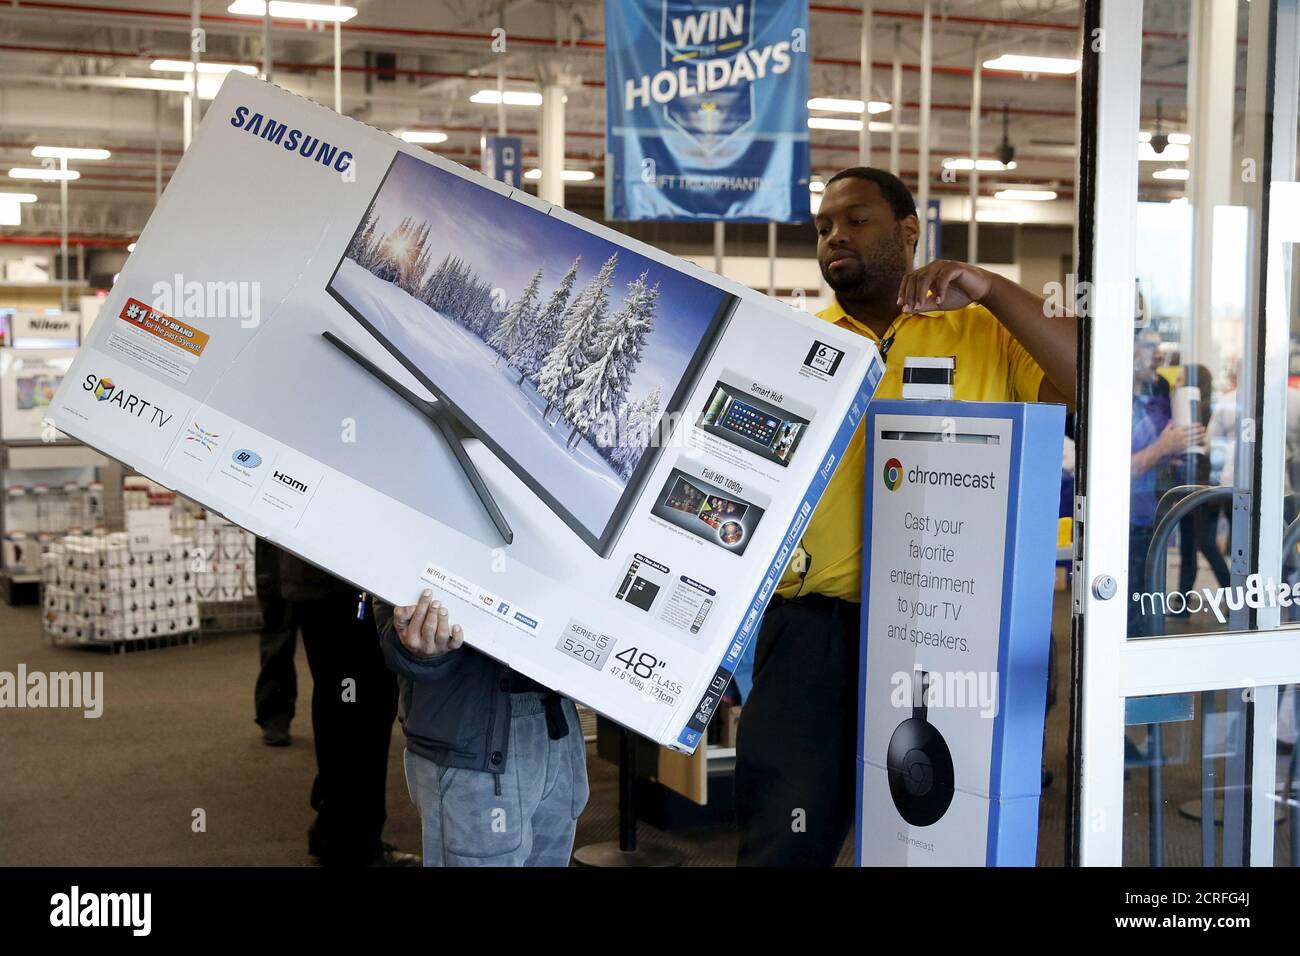 A shopper has receipt checked for a Samsung television before leaving a  Best Buy store in Westbury, New York November 27, 2015. Crowds were thin at U.S. stores and shopping malls in the early hours of Friday, initial spot checks showed, as shoppers responded to early Black Friday discounts with a mix of enthusiasm and caution. REUTERS/Shannon Stapleton Stock Photo